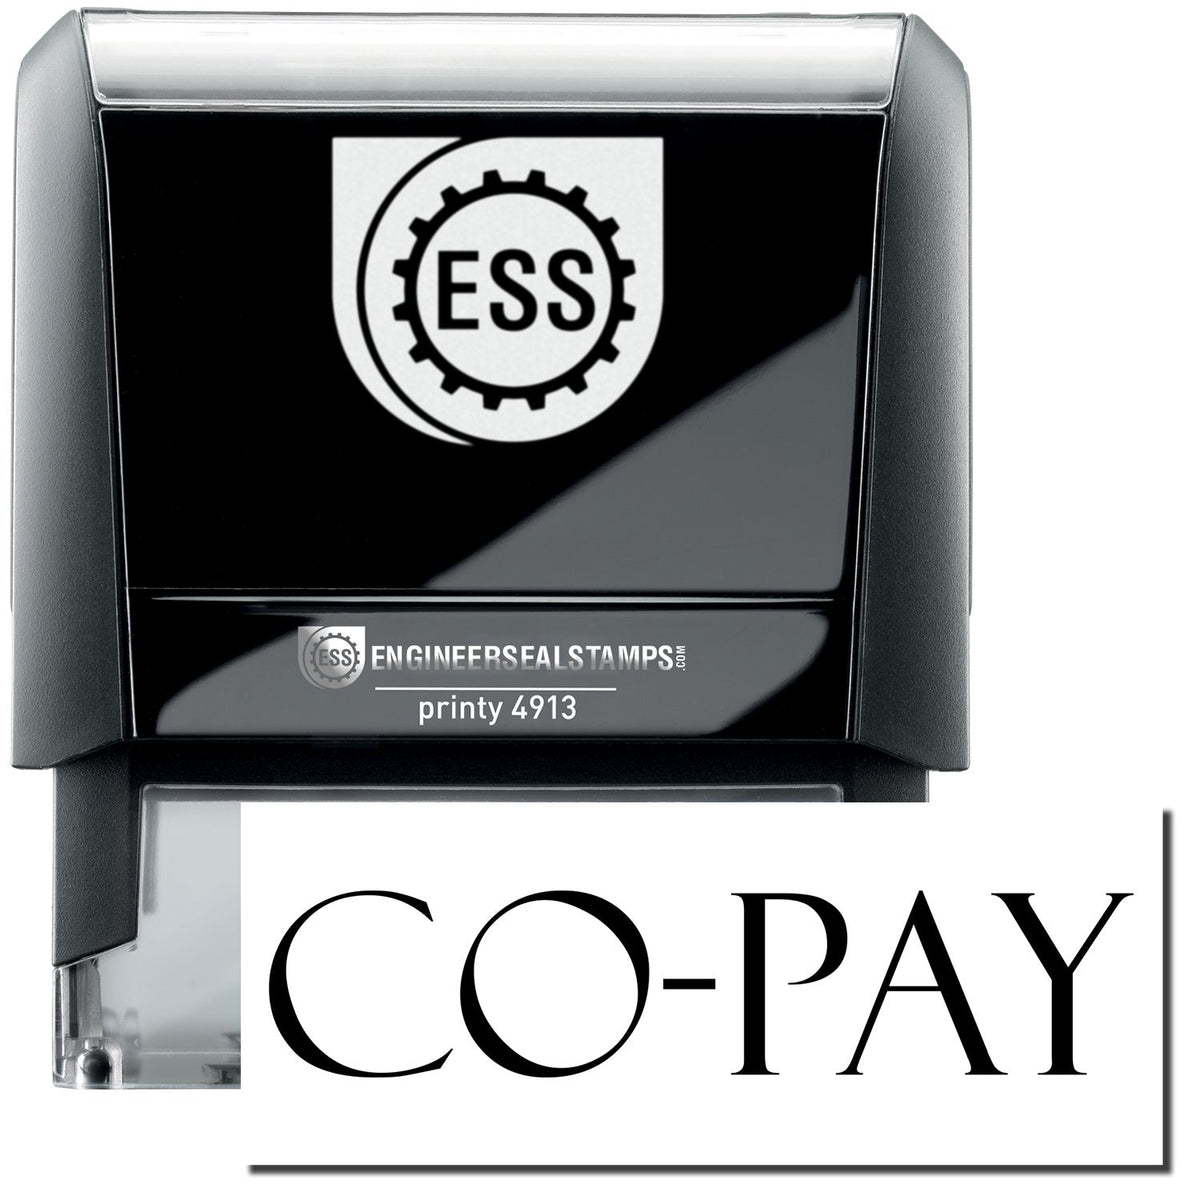 A self-inking stamp with a stamped image showing how the text &quot;CO-PAY&quot; in a large bold font is displayed by it.